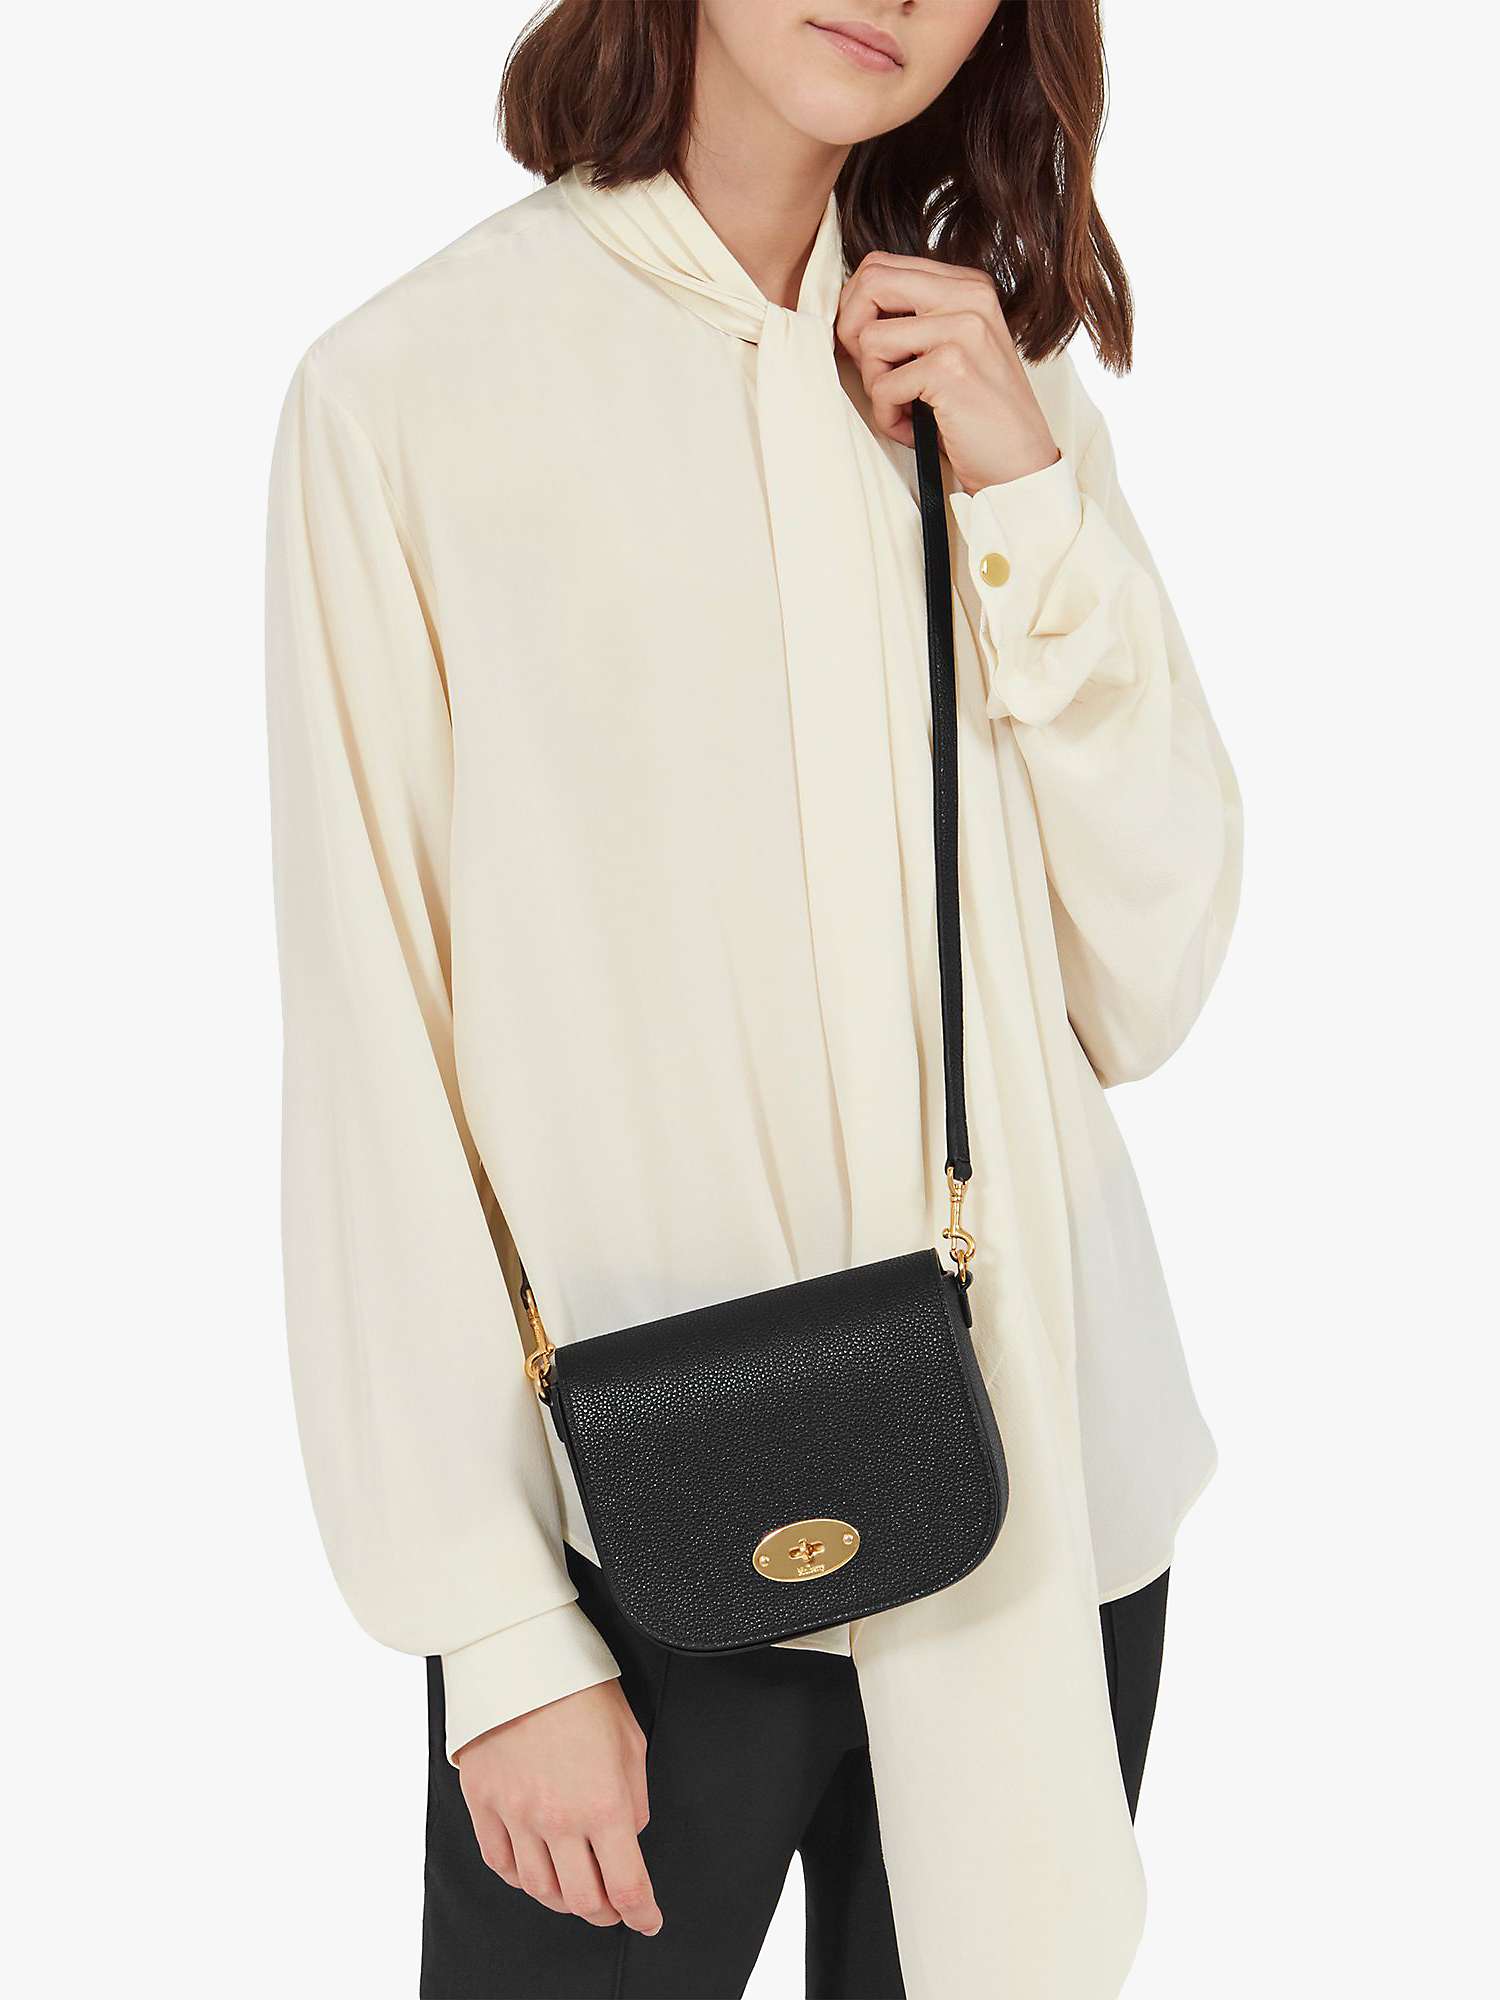 Buy Mulberry Small Darley Classic Grain Leather Satchel Online at johnlewis.com